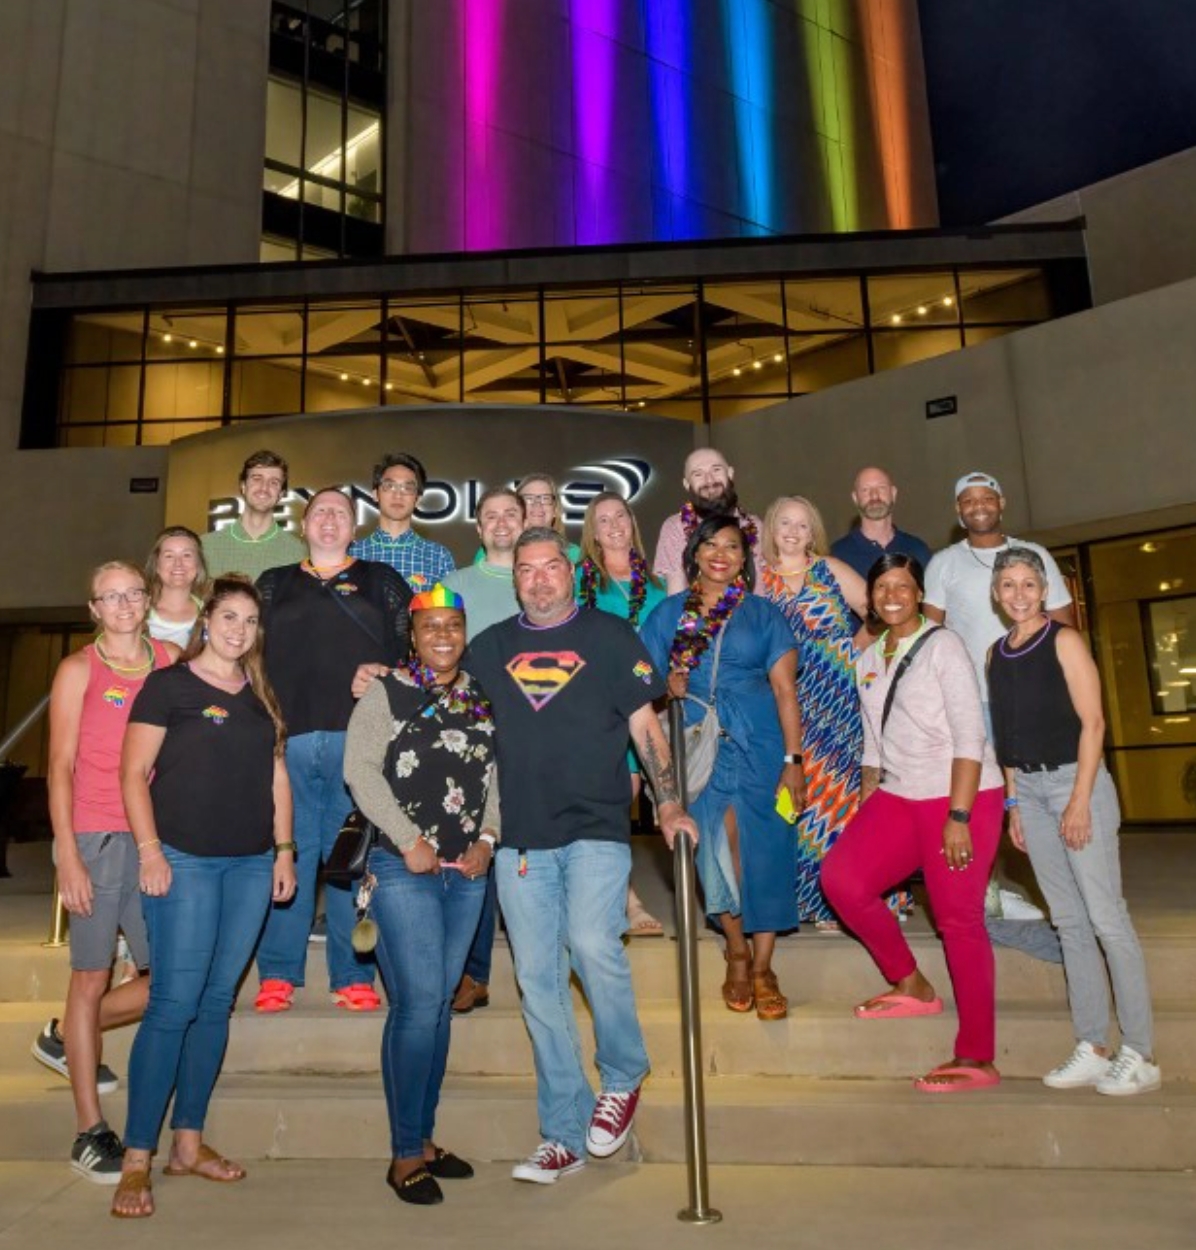 Members of the B United employee resource group, one of Reynolds American's diversity and inclusion programs, standing on steps wearing leis.